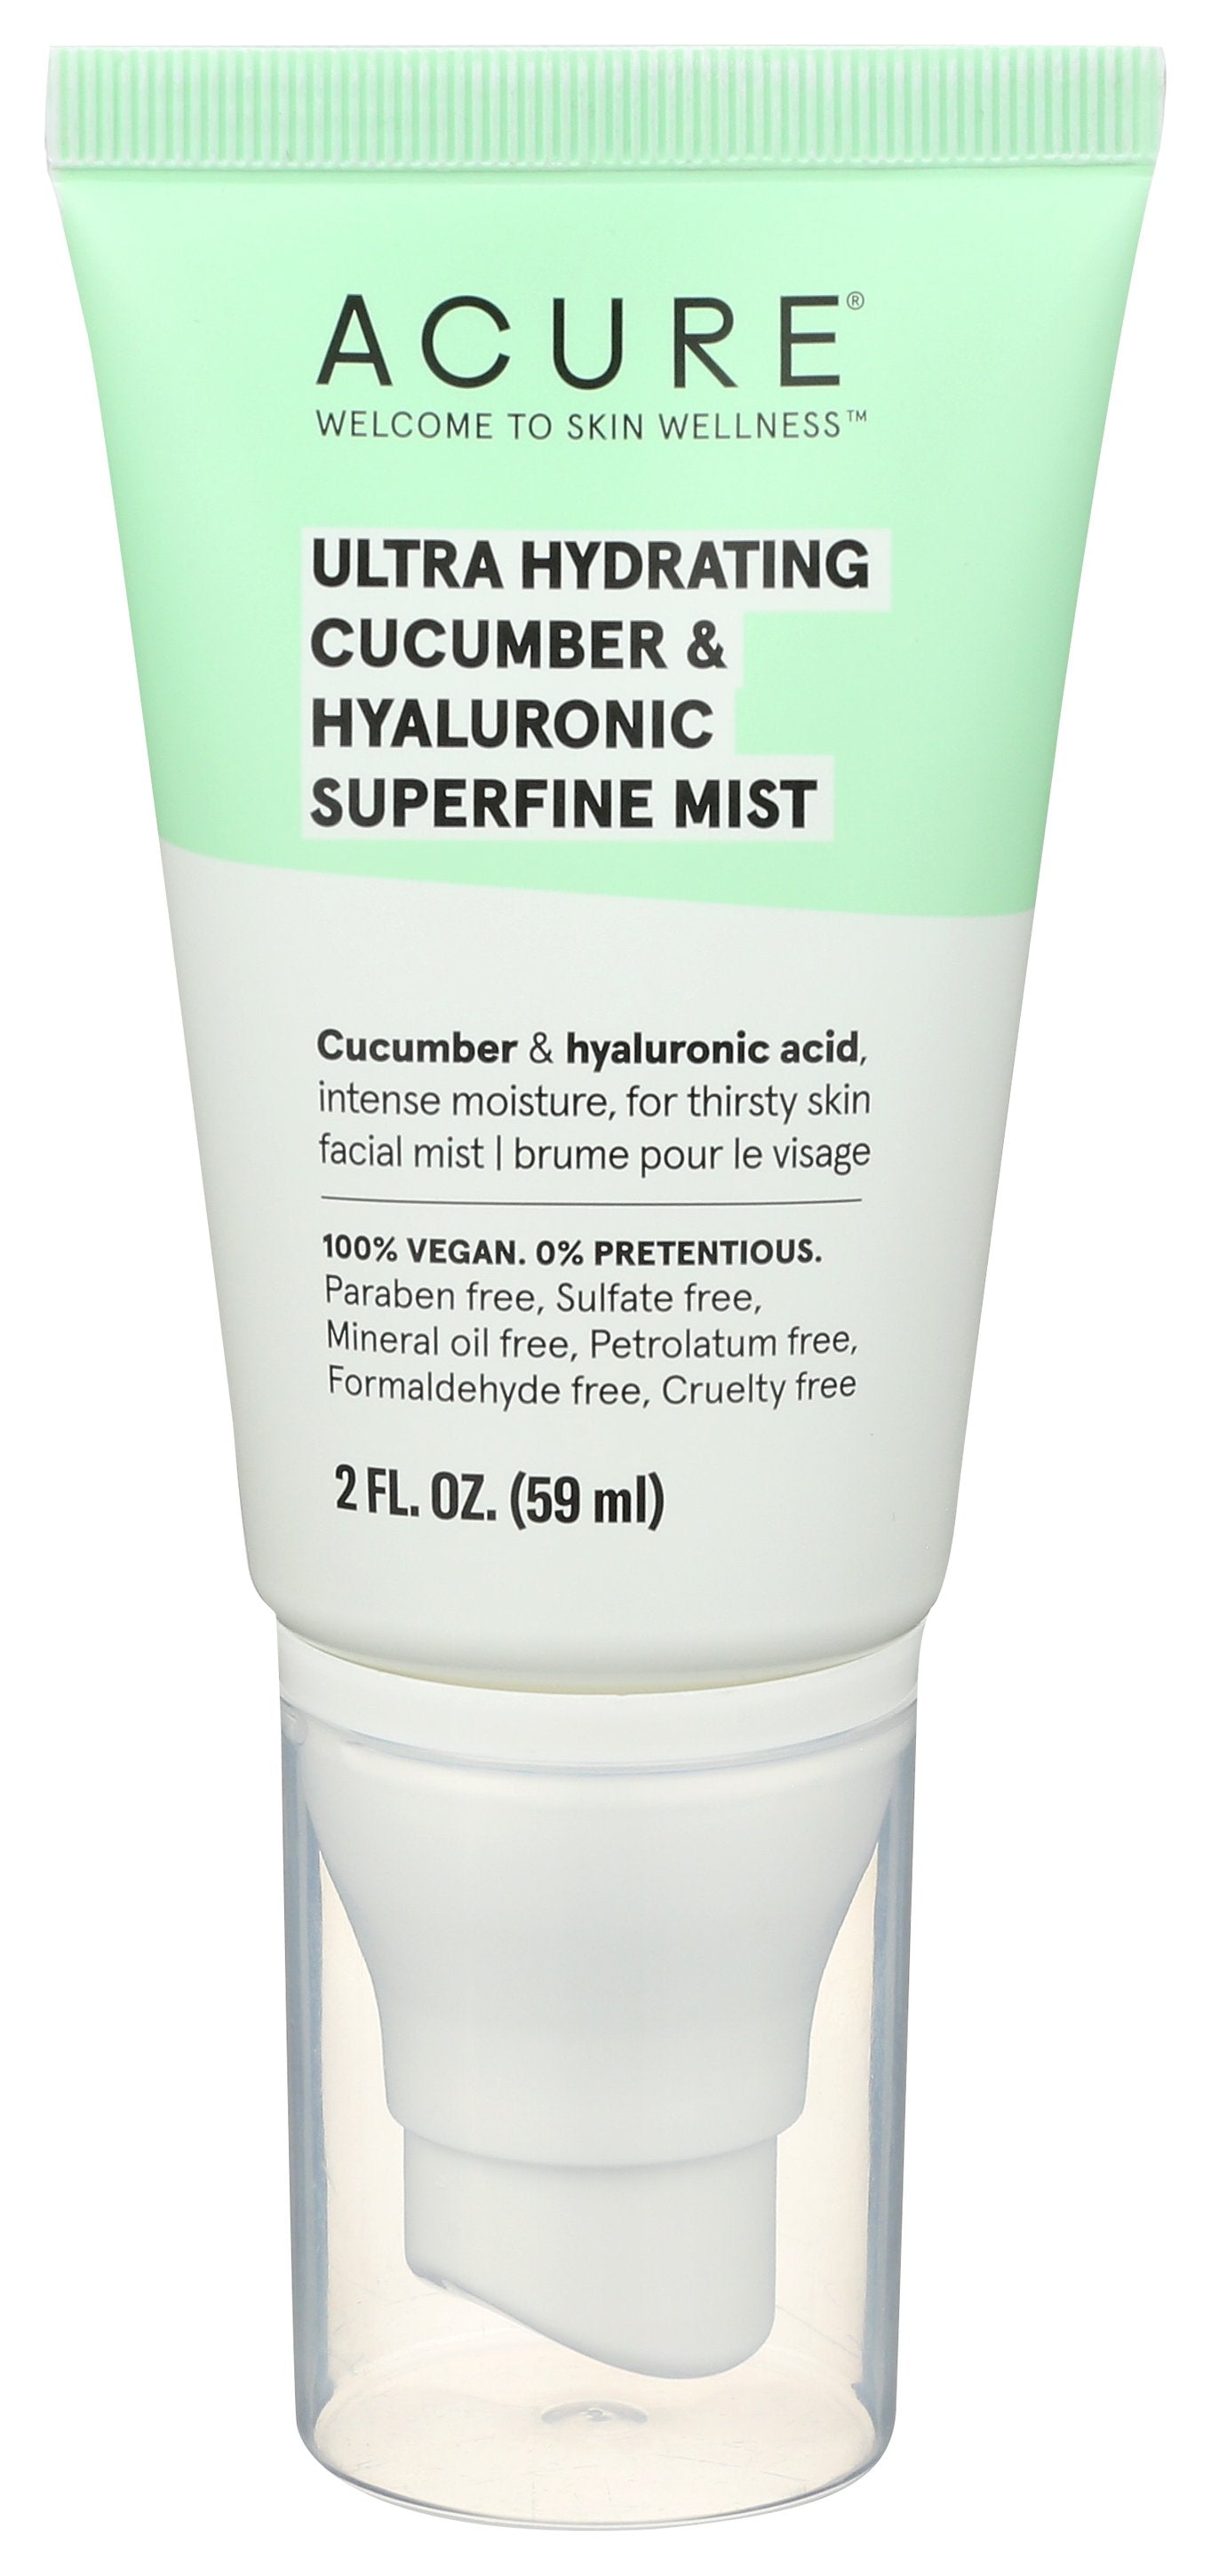 ACURE MIST CCMBR HYALURONIC